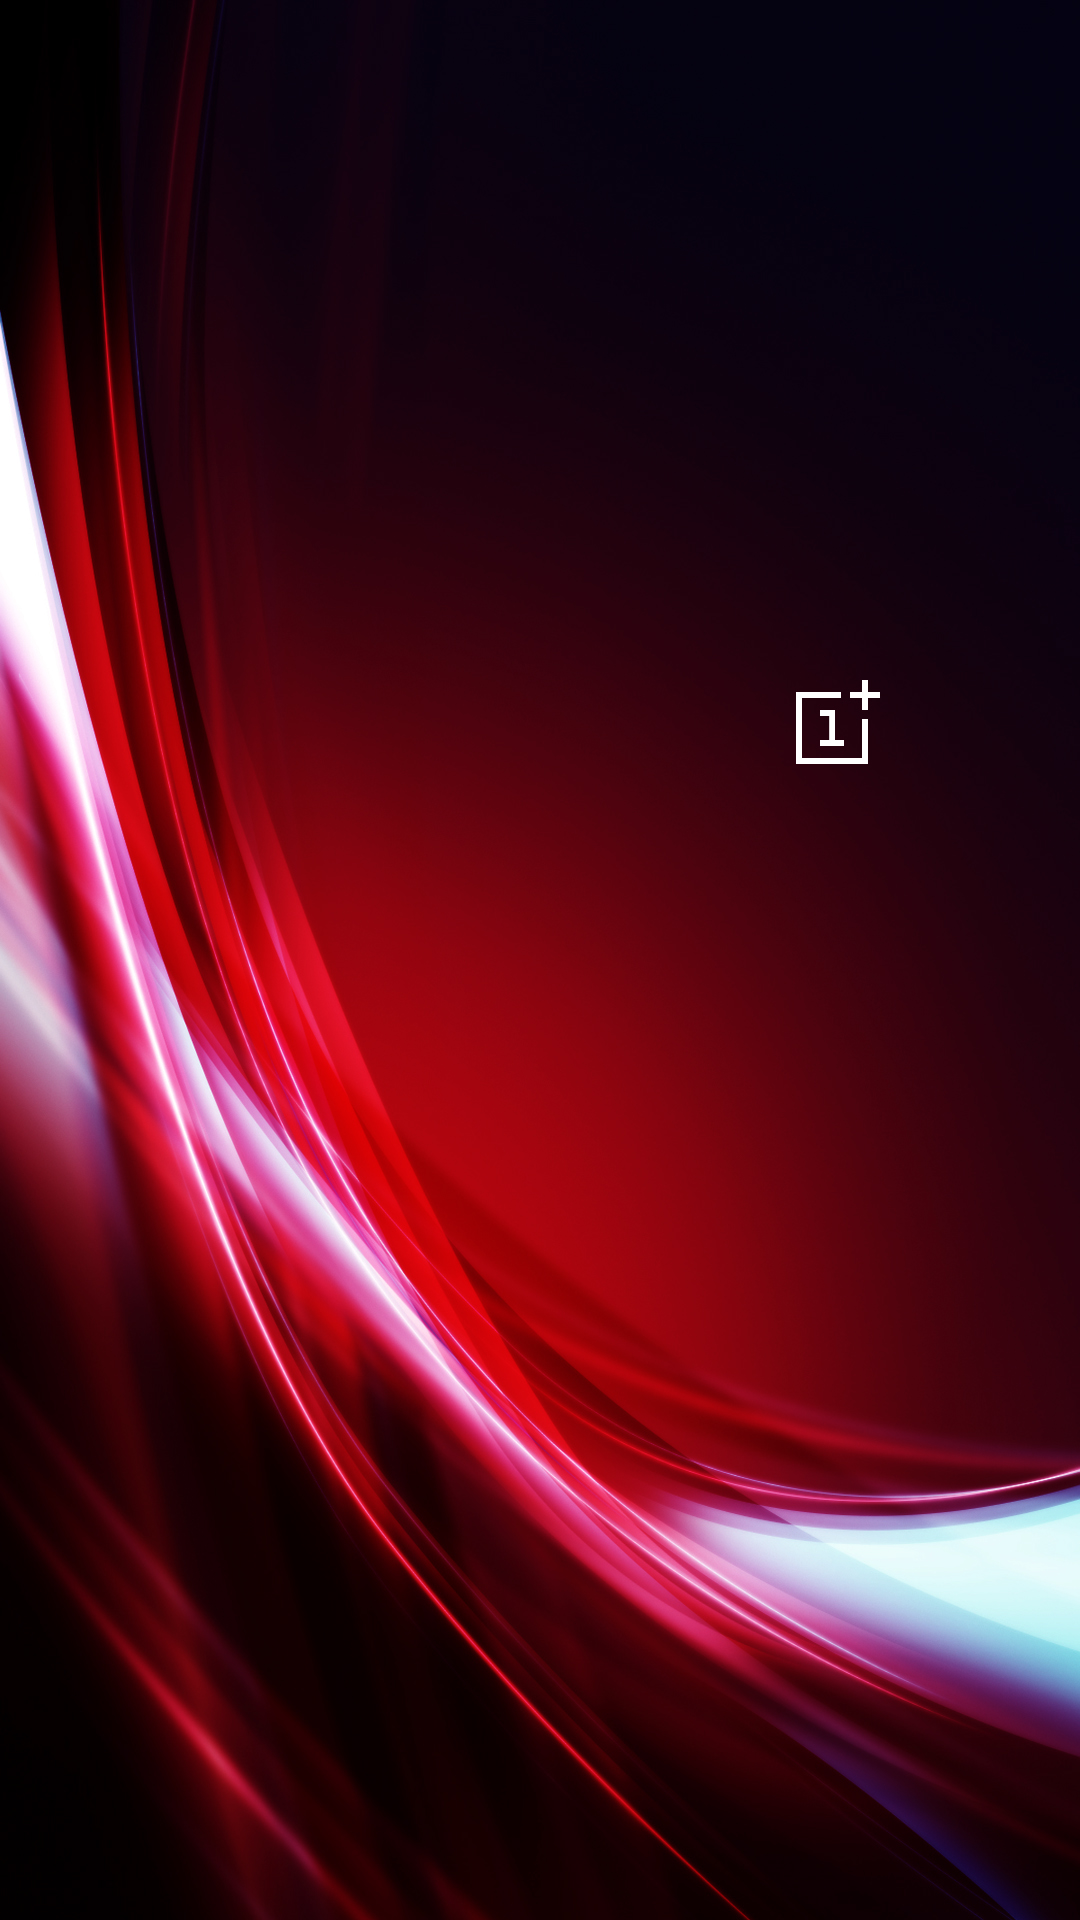 letv wallpaper hd,red,light,text,pink,maroon